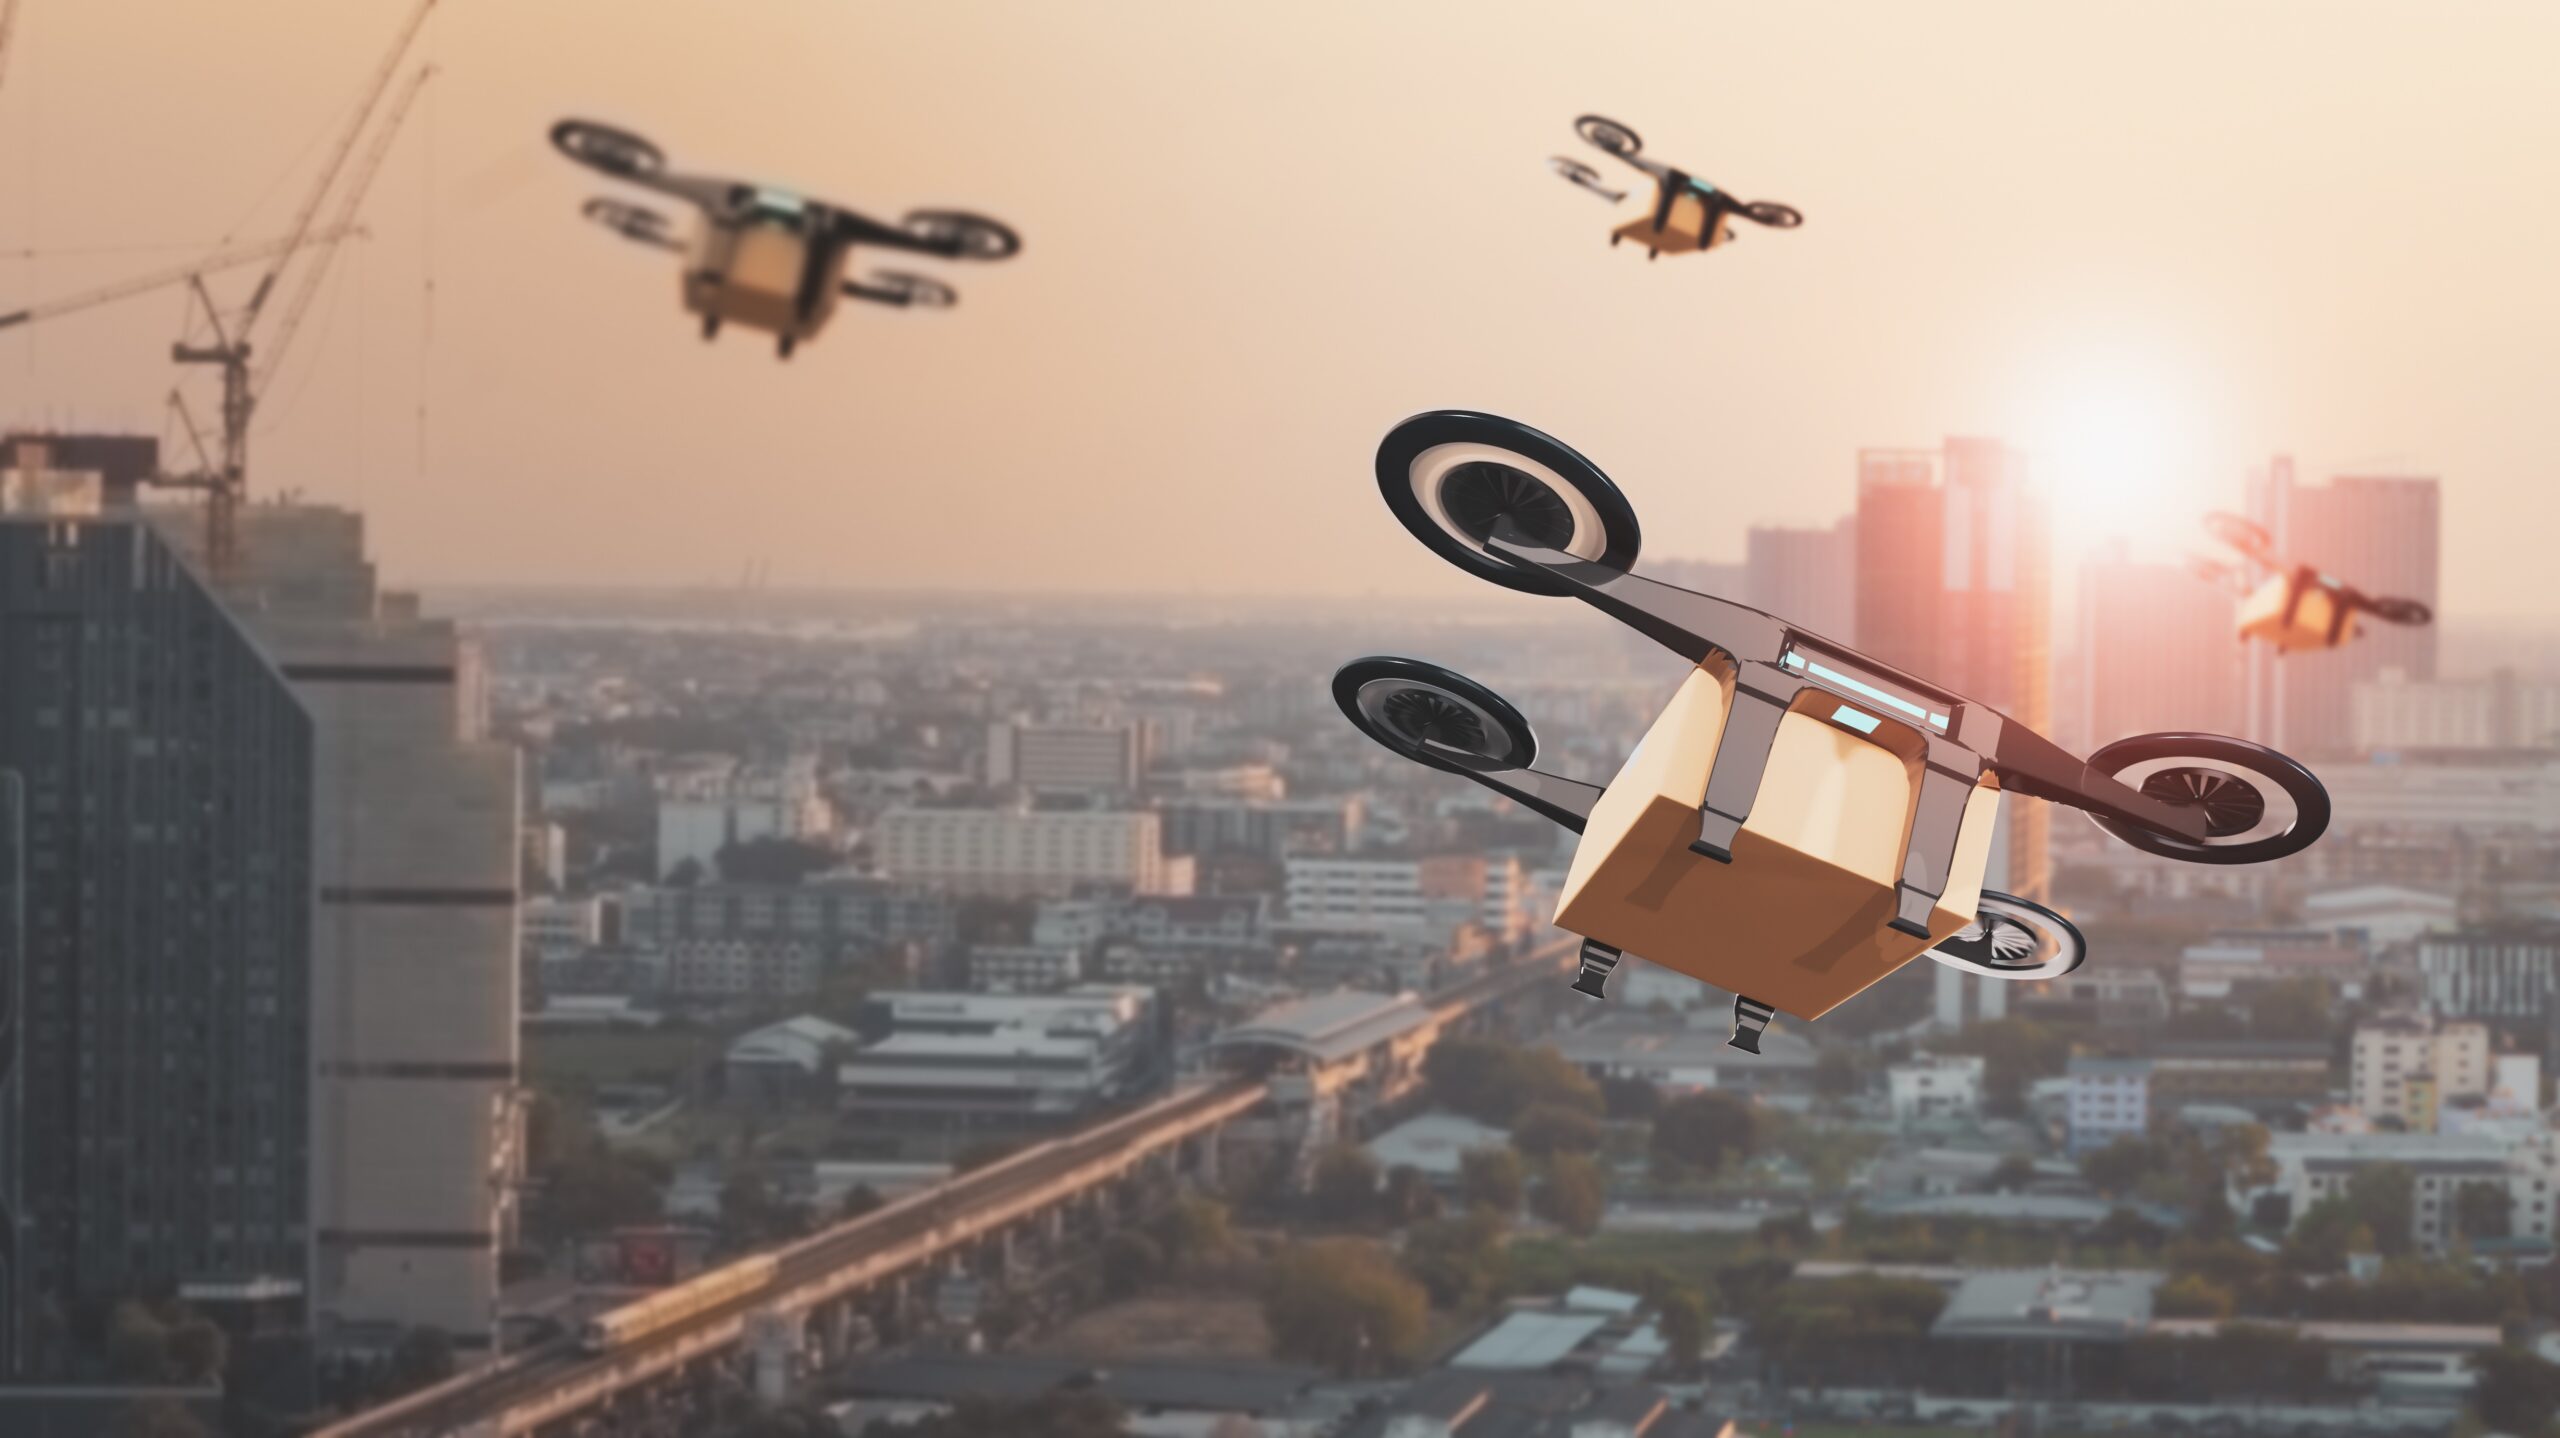 Drone Delivering Package